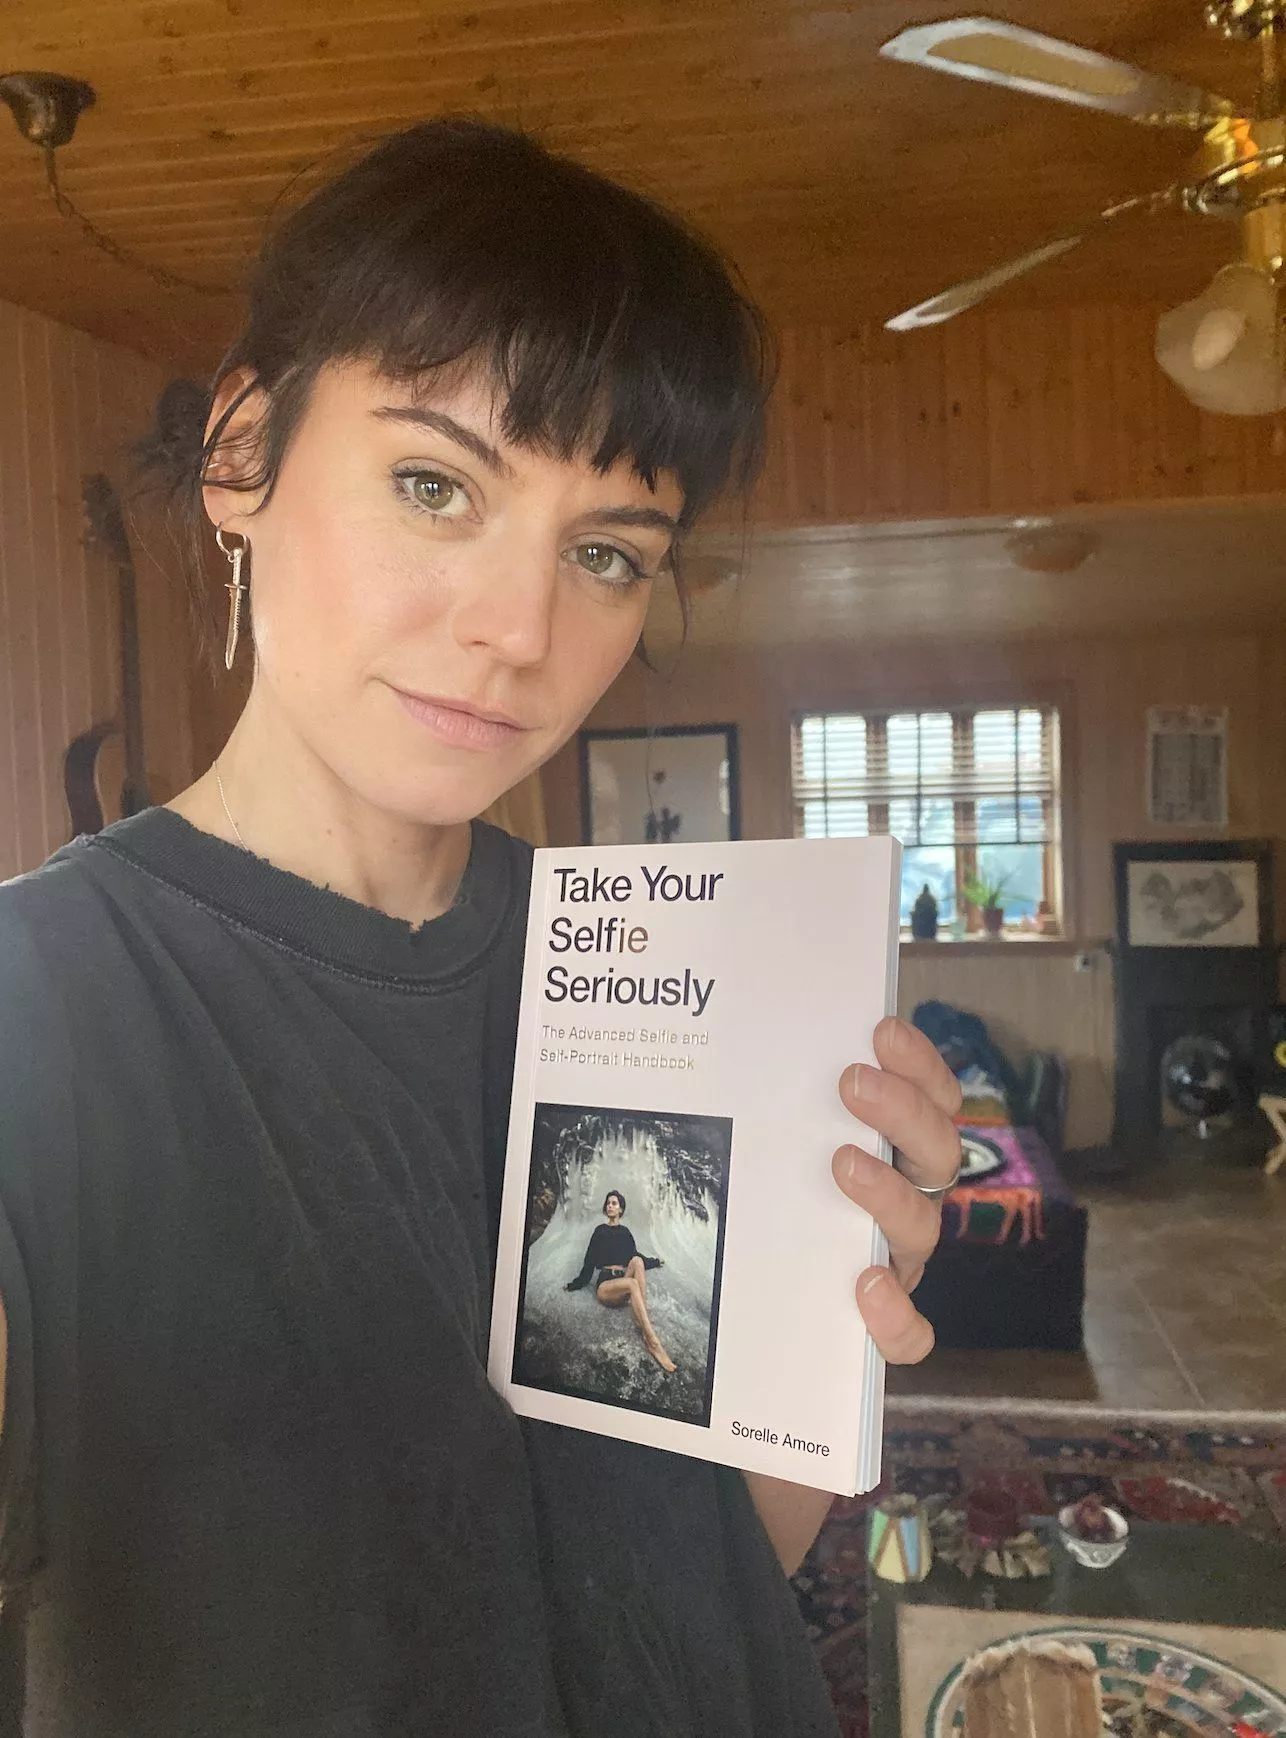 sorelle amore with her book take your selfie seriously (advanced selfie)